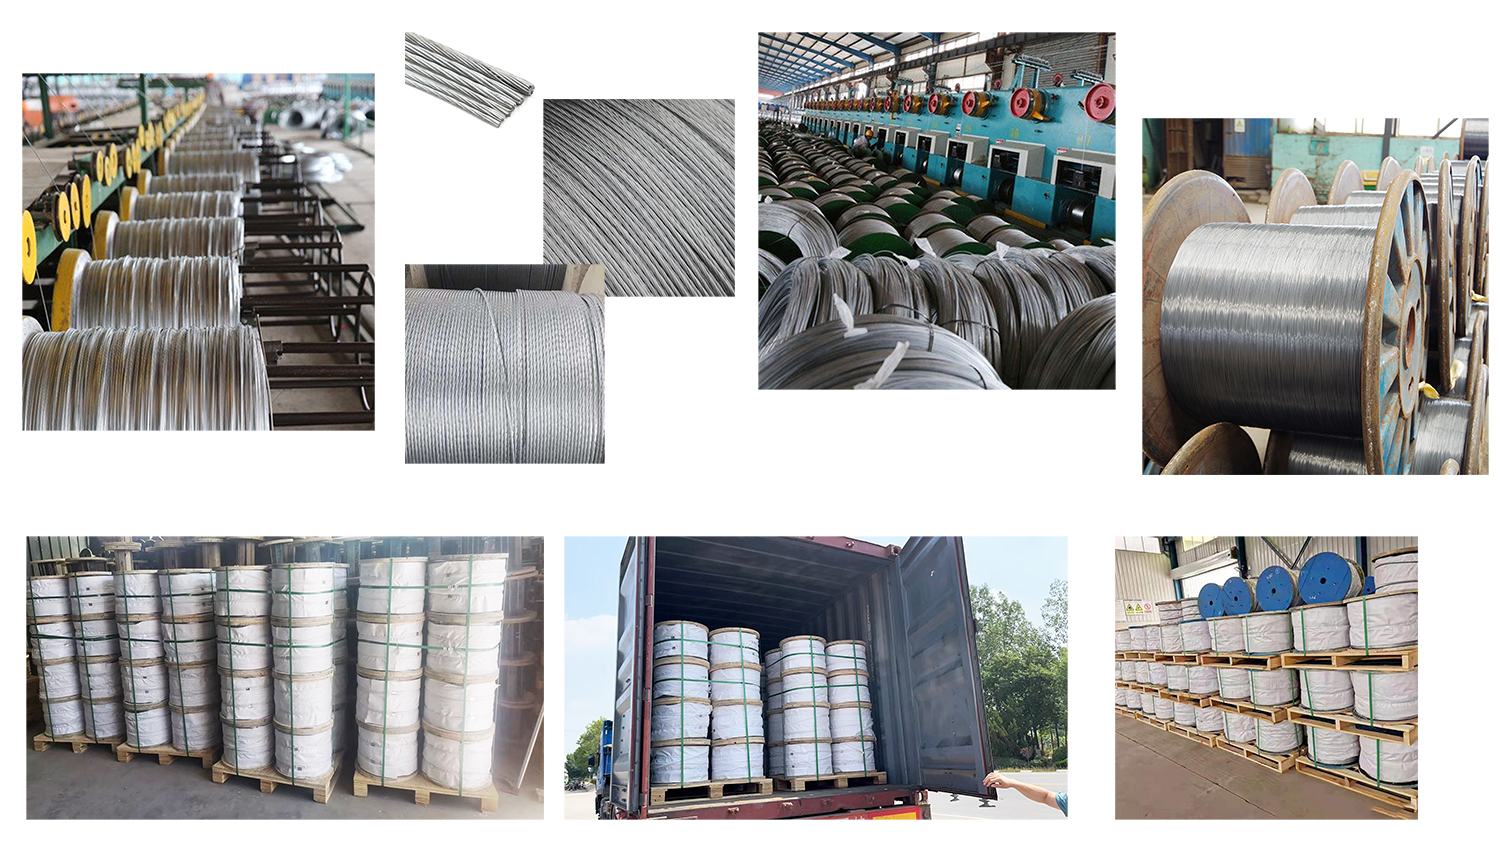 Introduction of hot-dip galvanized steel strand: